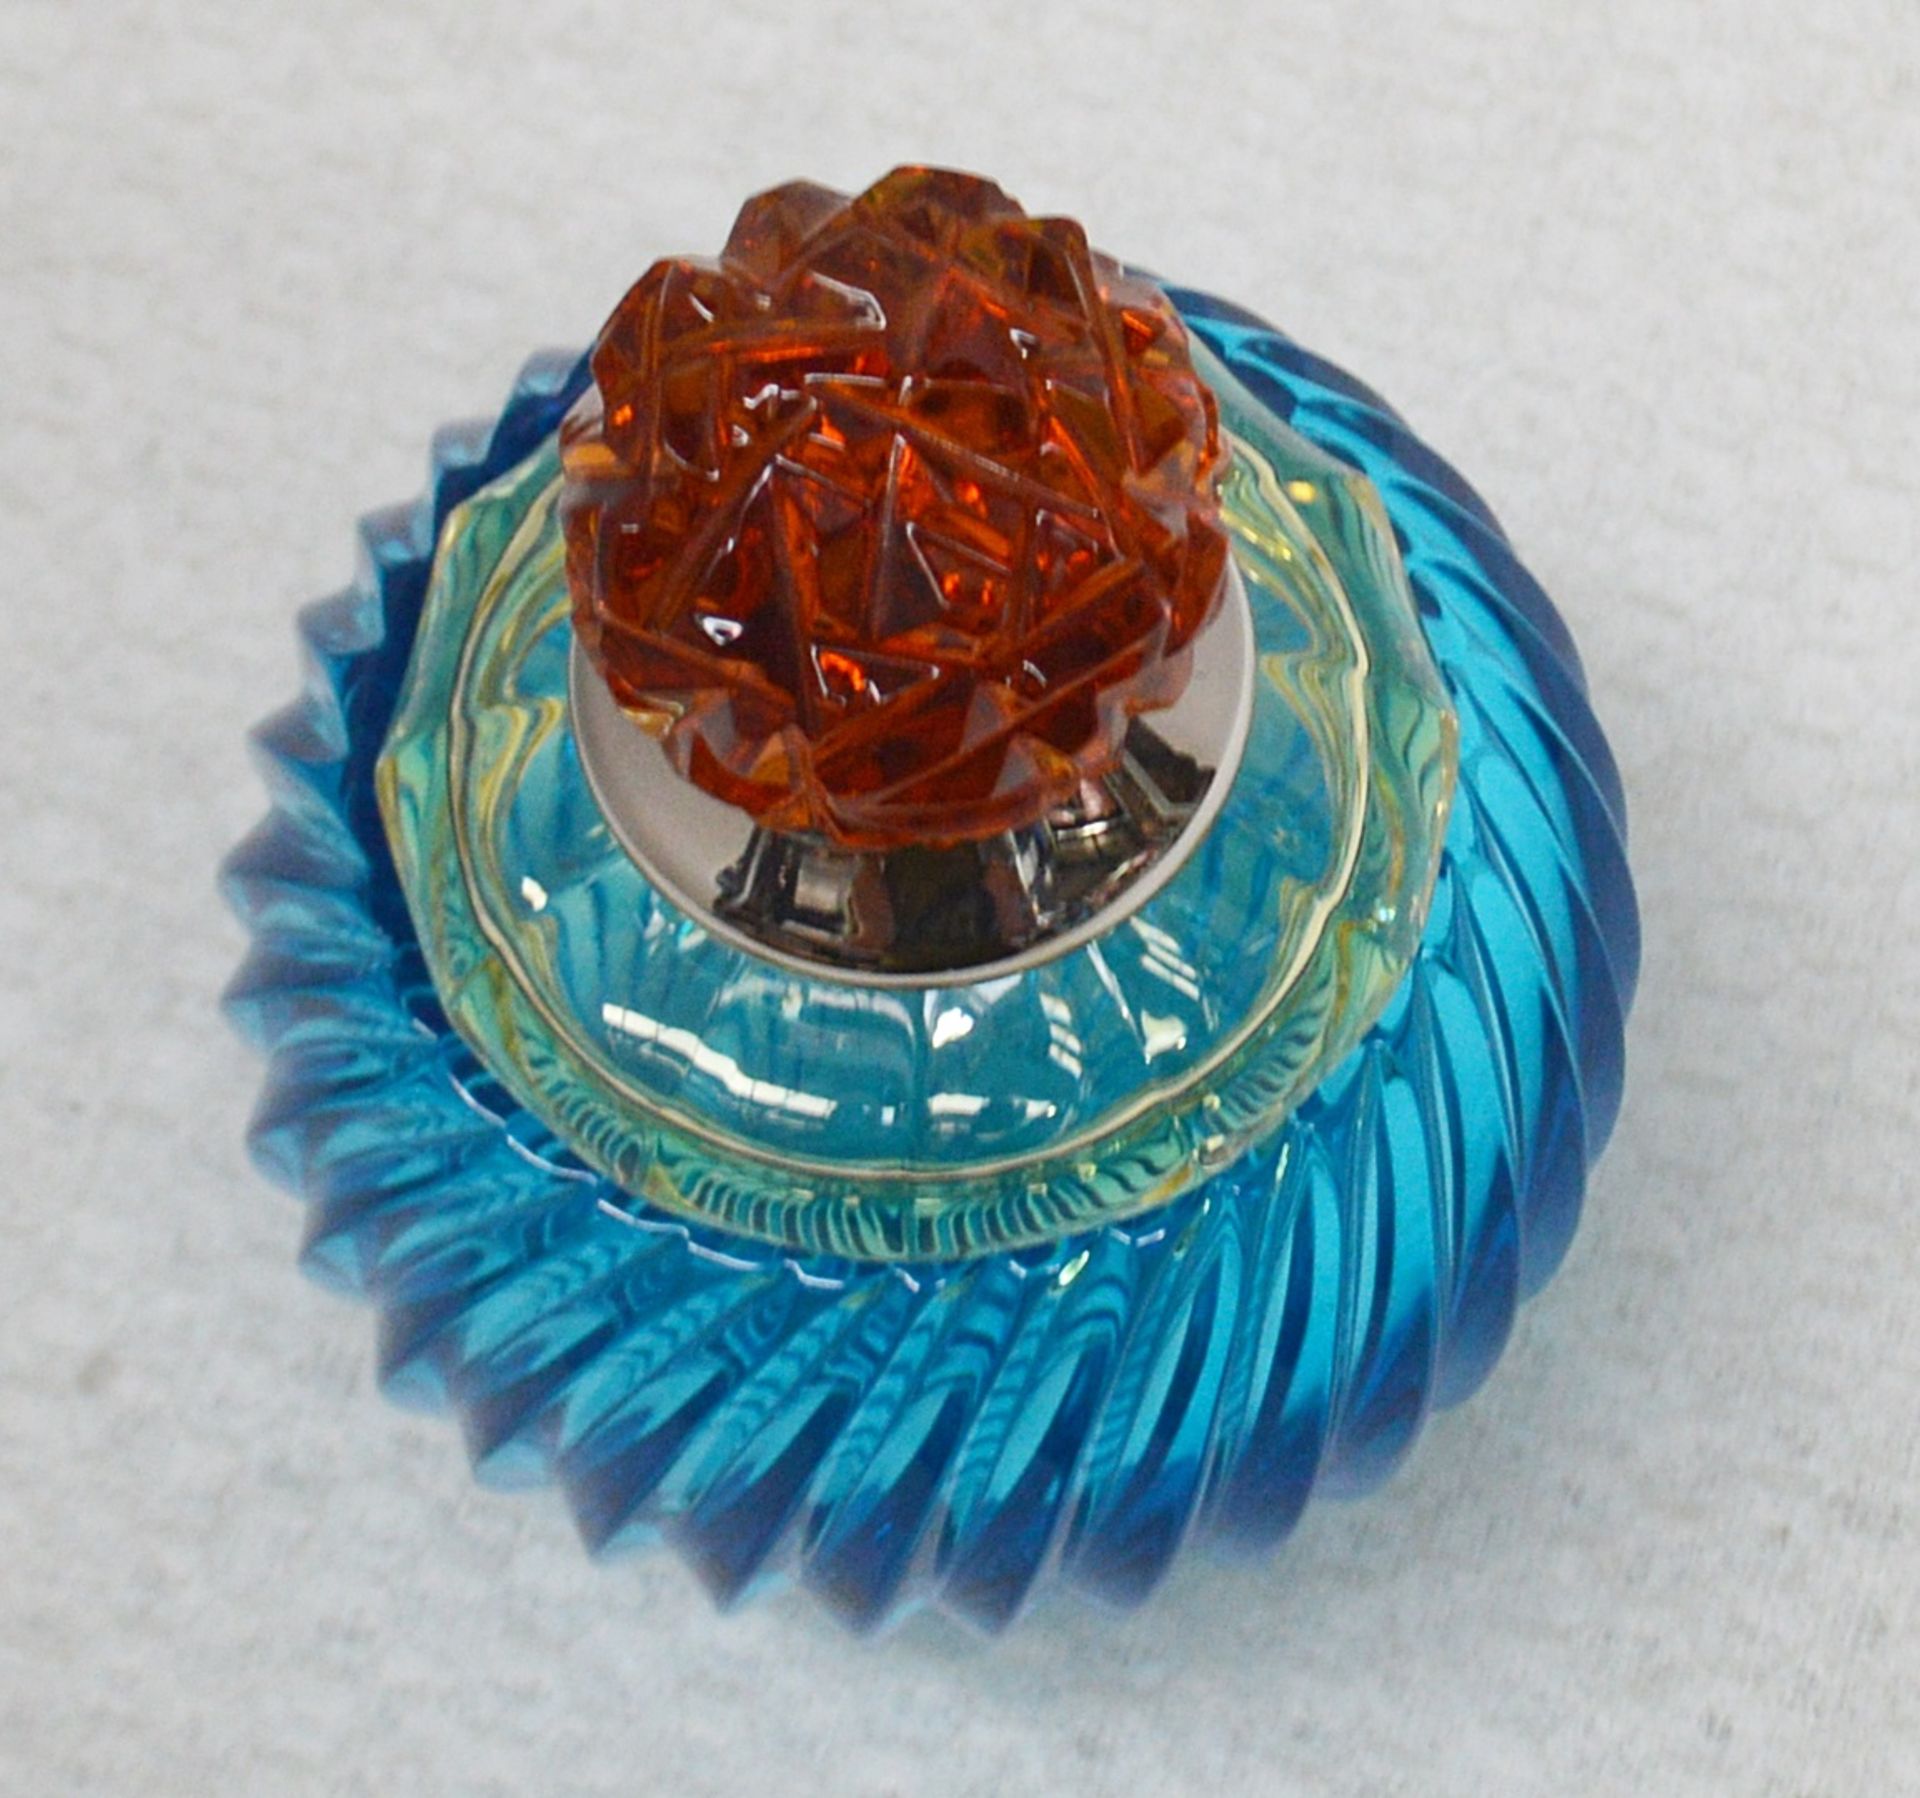 1 x BALDI 'Home Jewels' Italian Hand-crafted Artisan Small Coccinella Jar In Blue, Orange And Yellow - Image 3 of 3